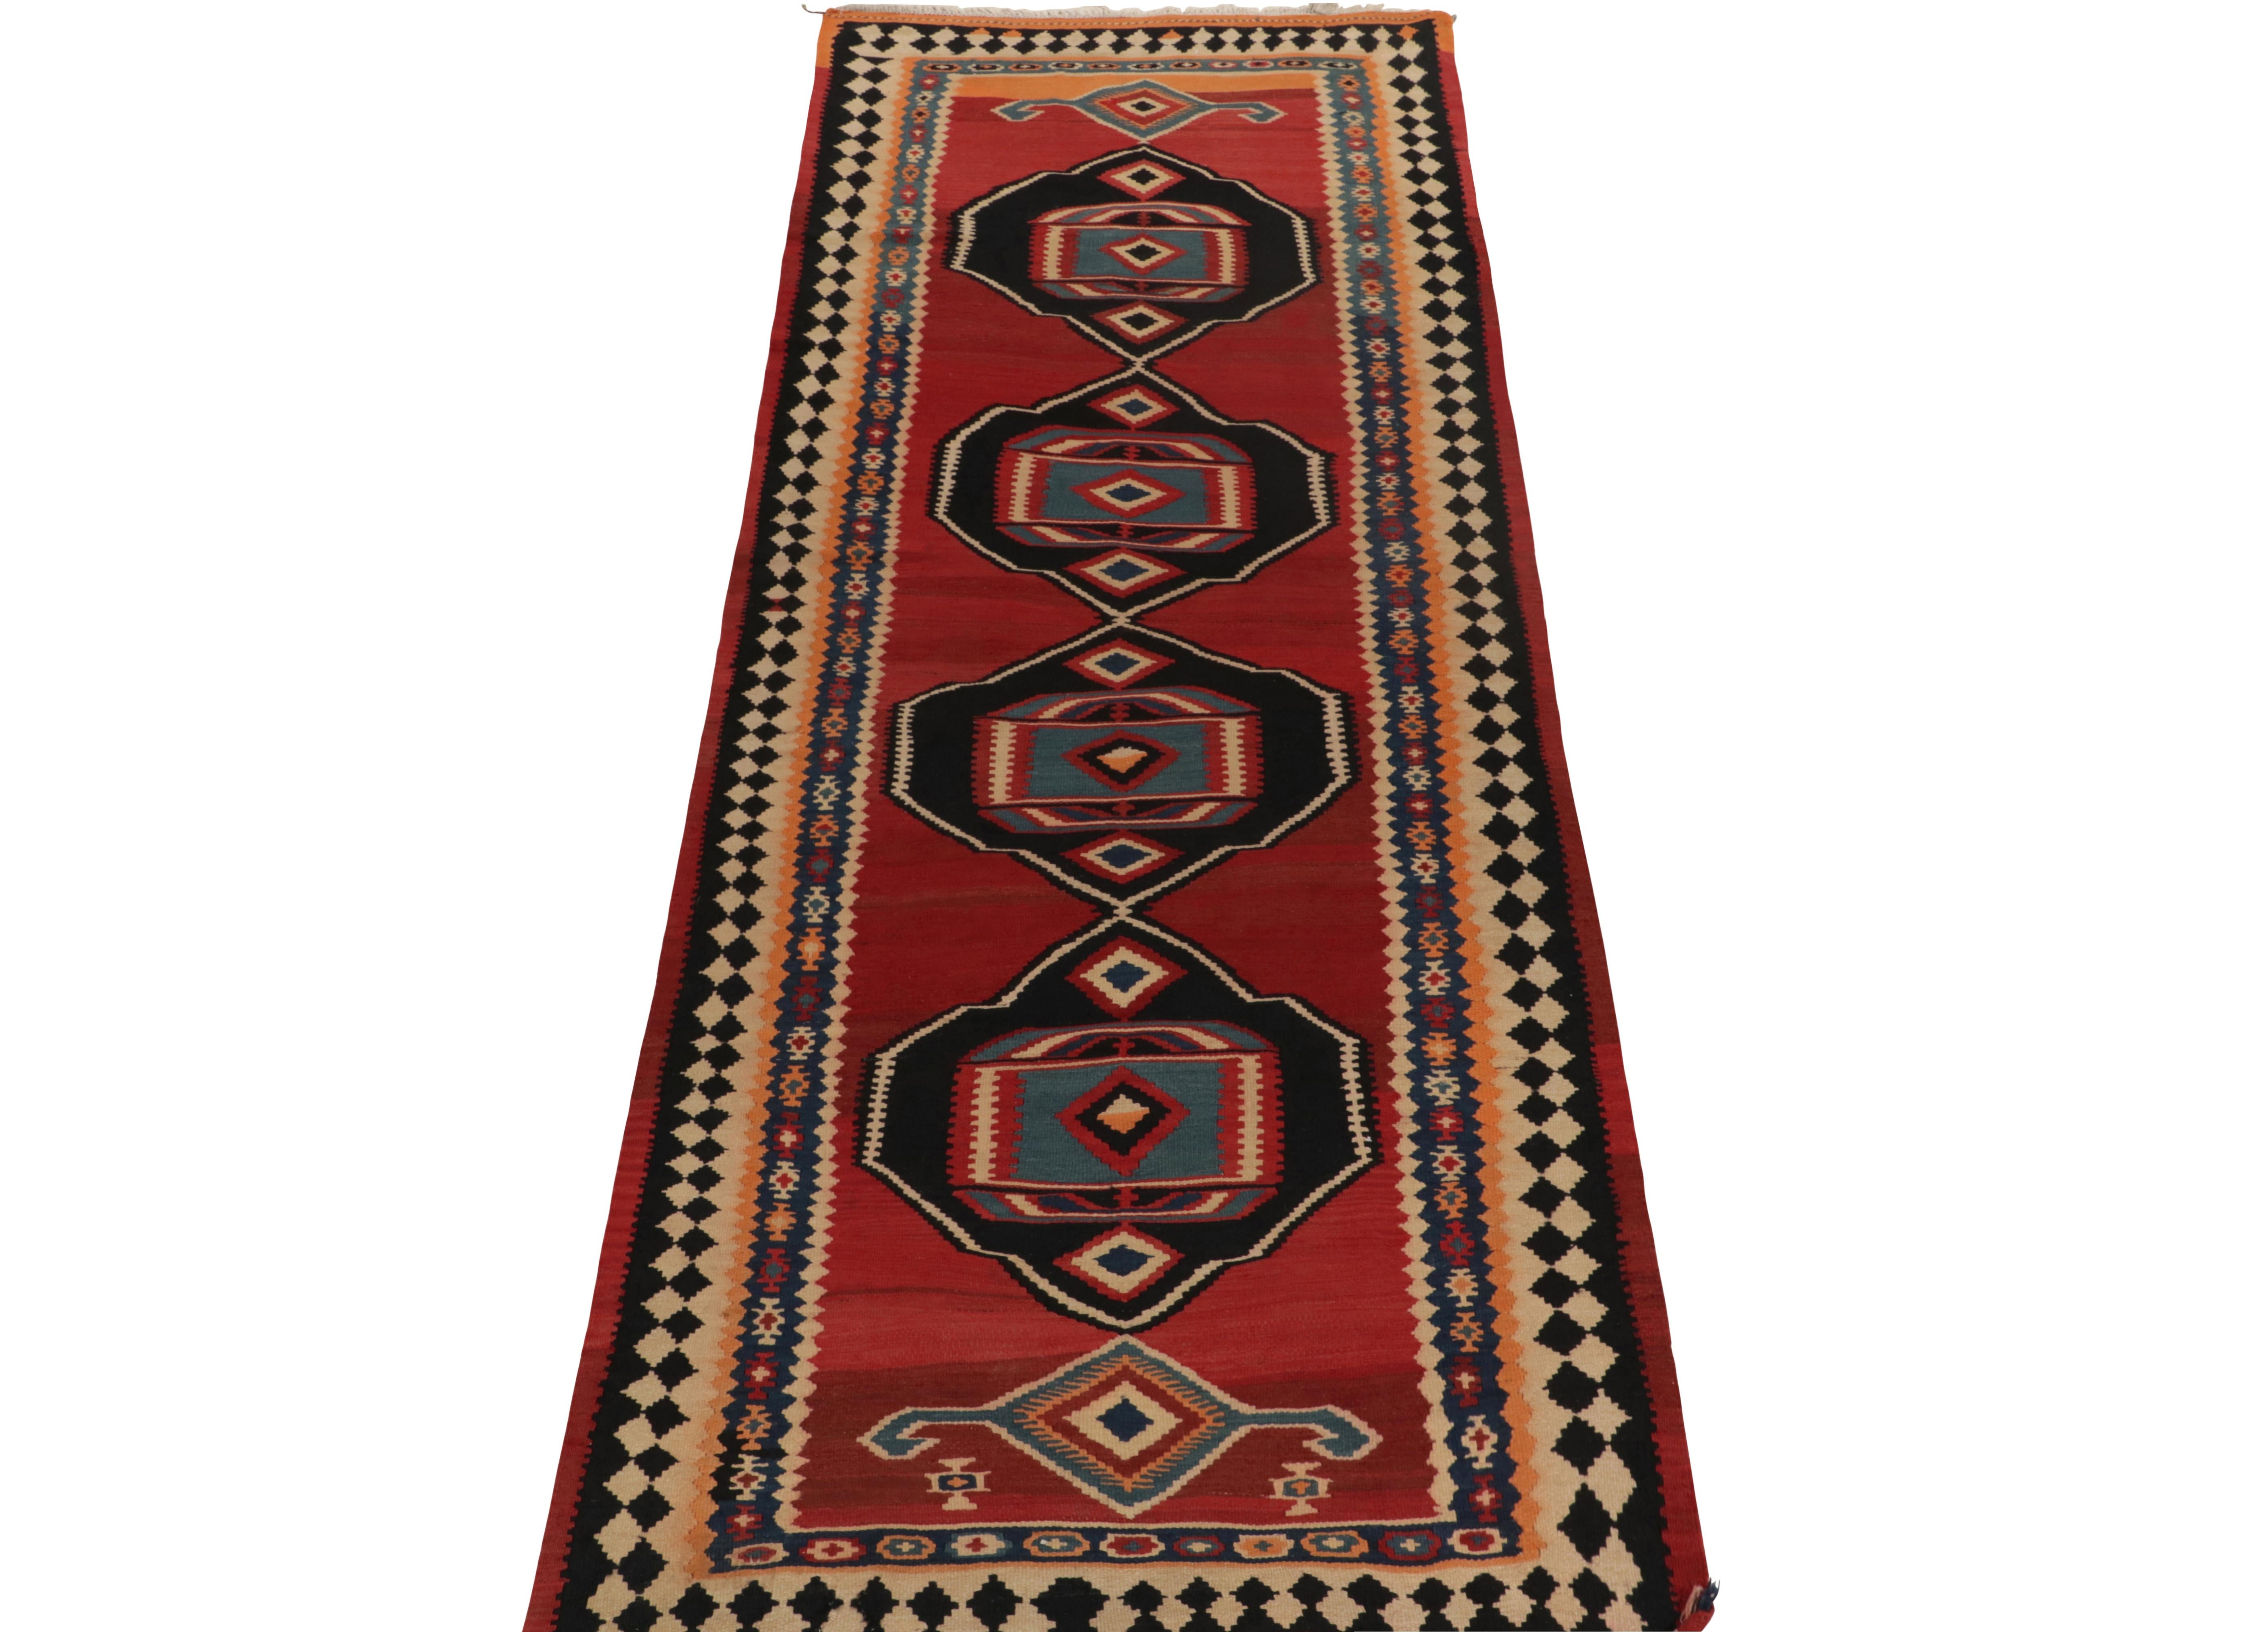 Handwoven in wool, a vintage Kurdish Kilim unveiled from R&K Principal Josh Nazmiyal’s coveted treasury of Persian masterpieces. 

Originating circa 1950-1960, this particular 4x12 tribal rug features a rich play of pink-red, black, beige & blue